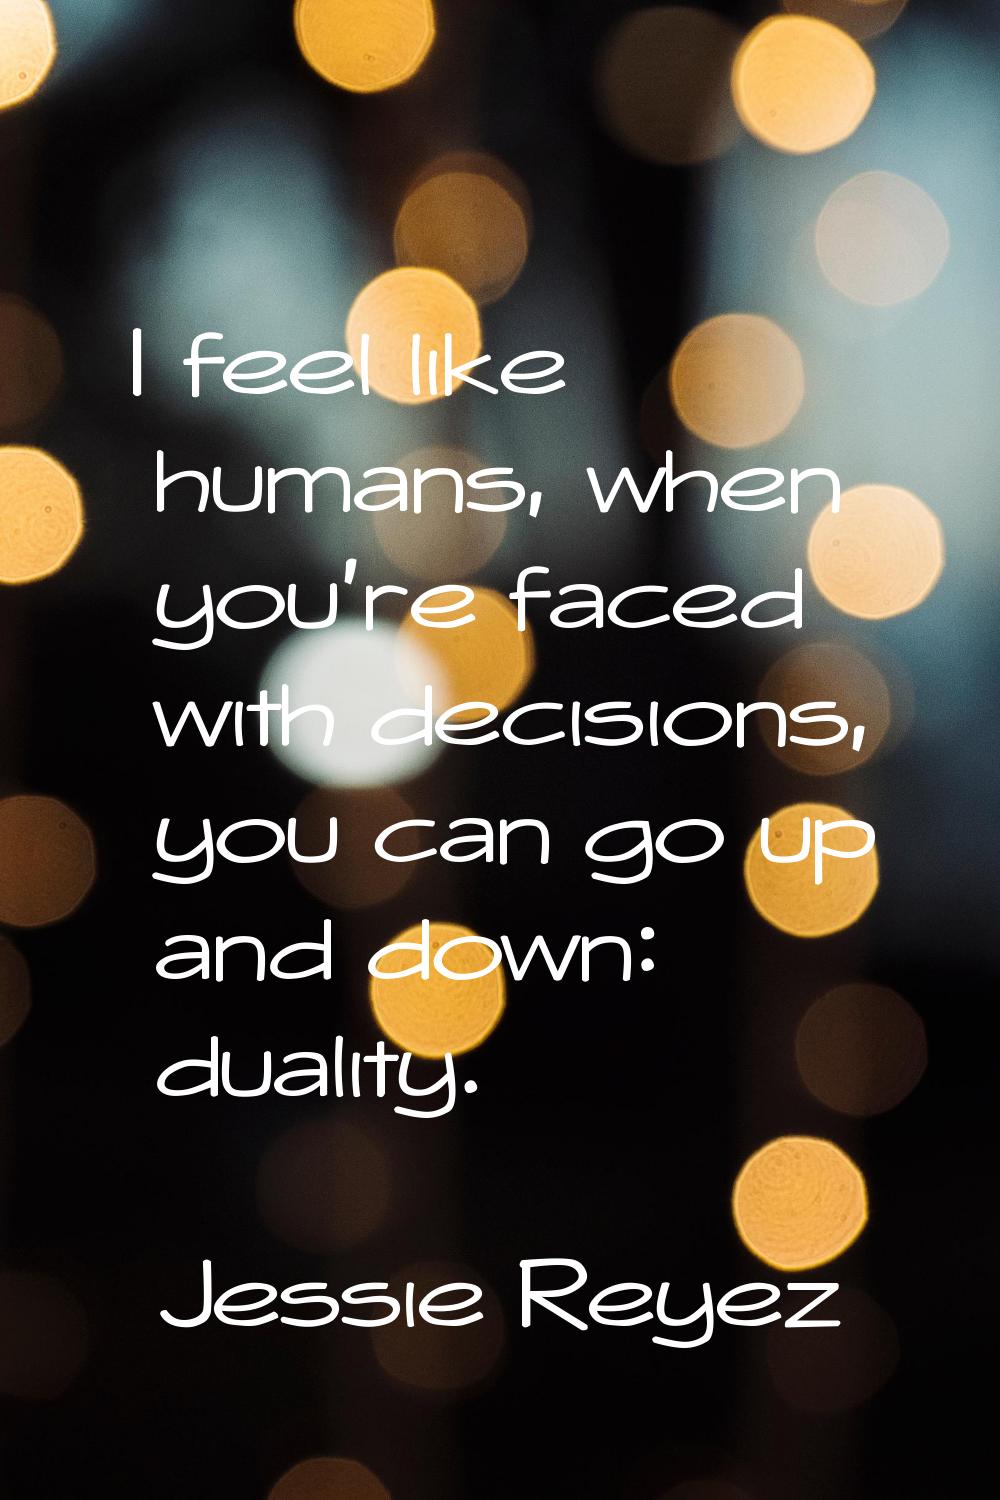 I feel like humans, when you're faced with decisions, you can go up and down: duality.